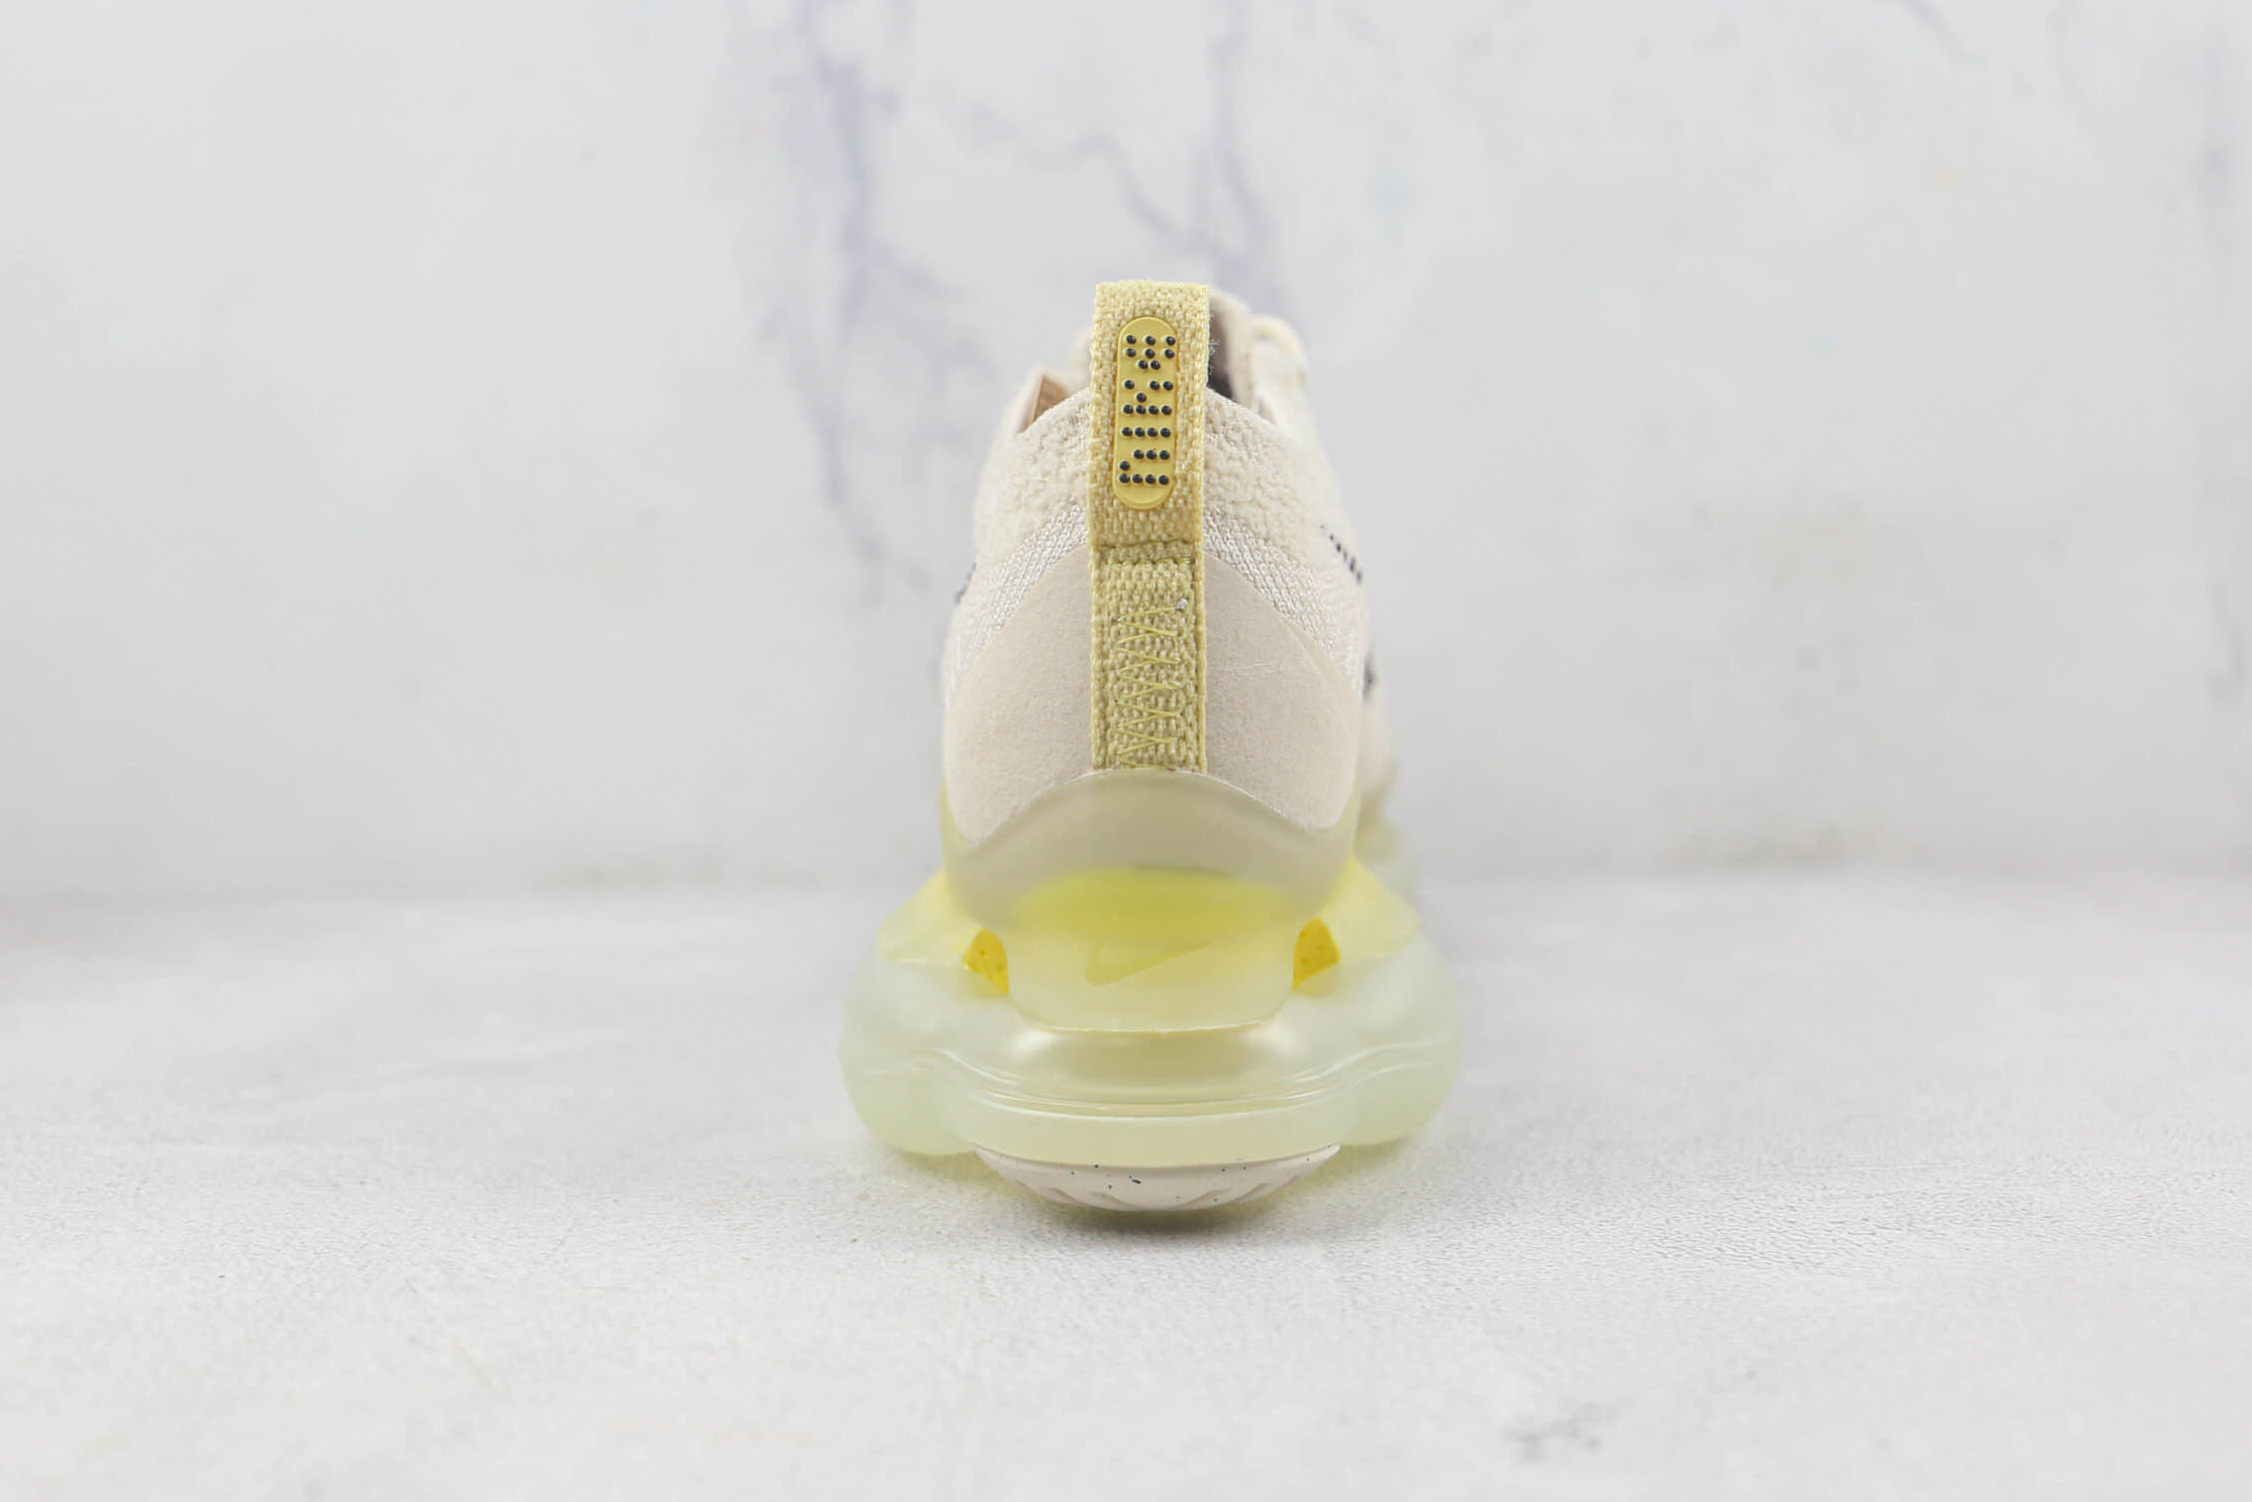 Nike Air Max Scorpion Flyknit 'Lemon Wash' DJ4701-001 - Stylish and Colorful Athletic Sneakers